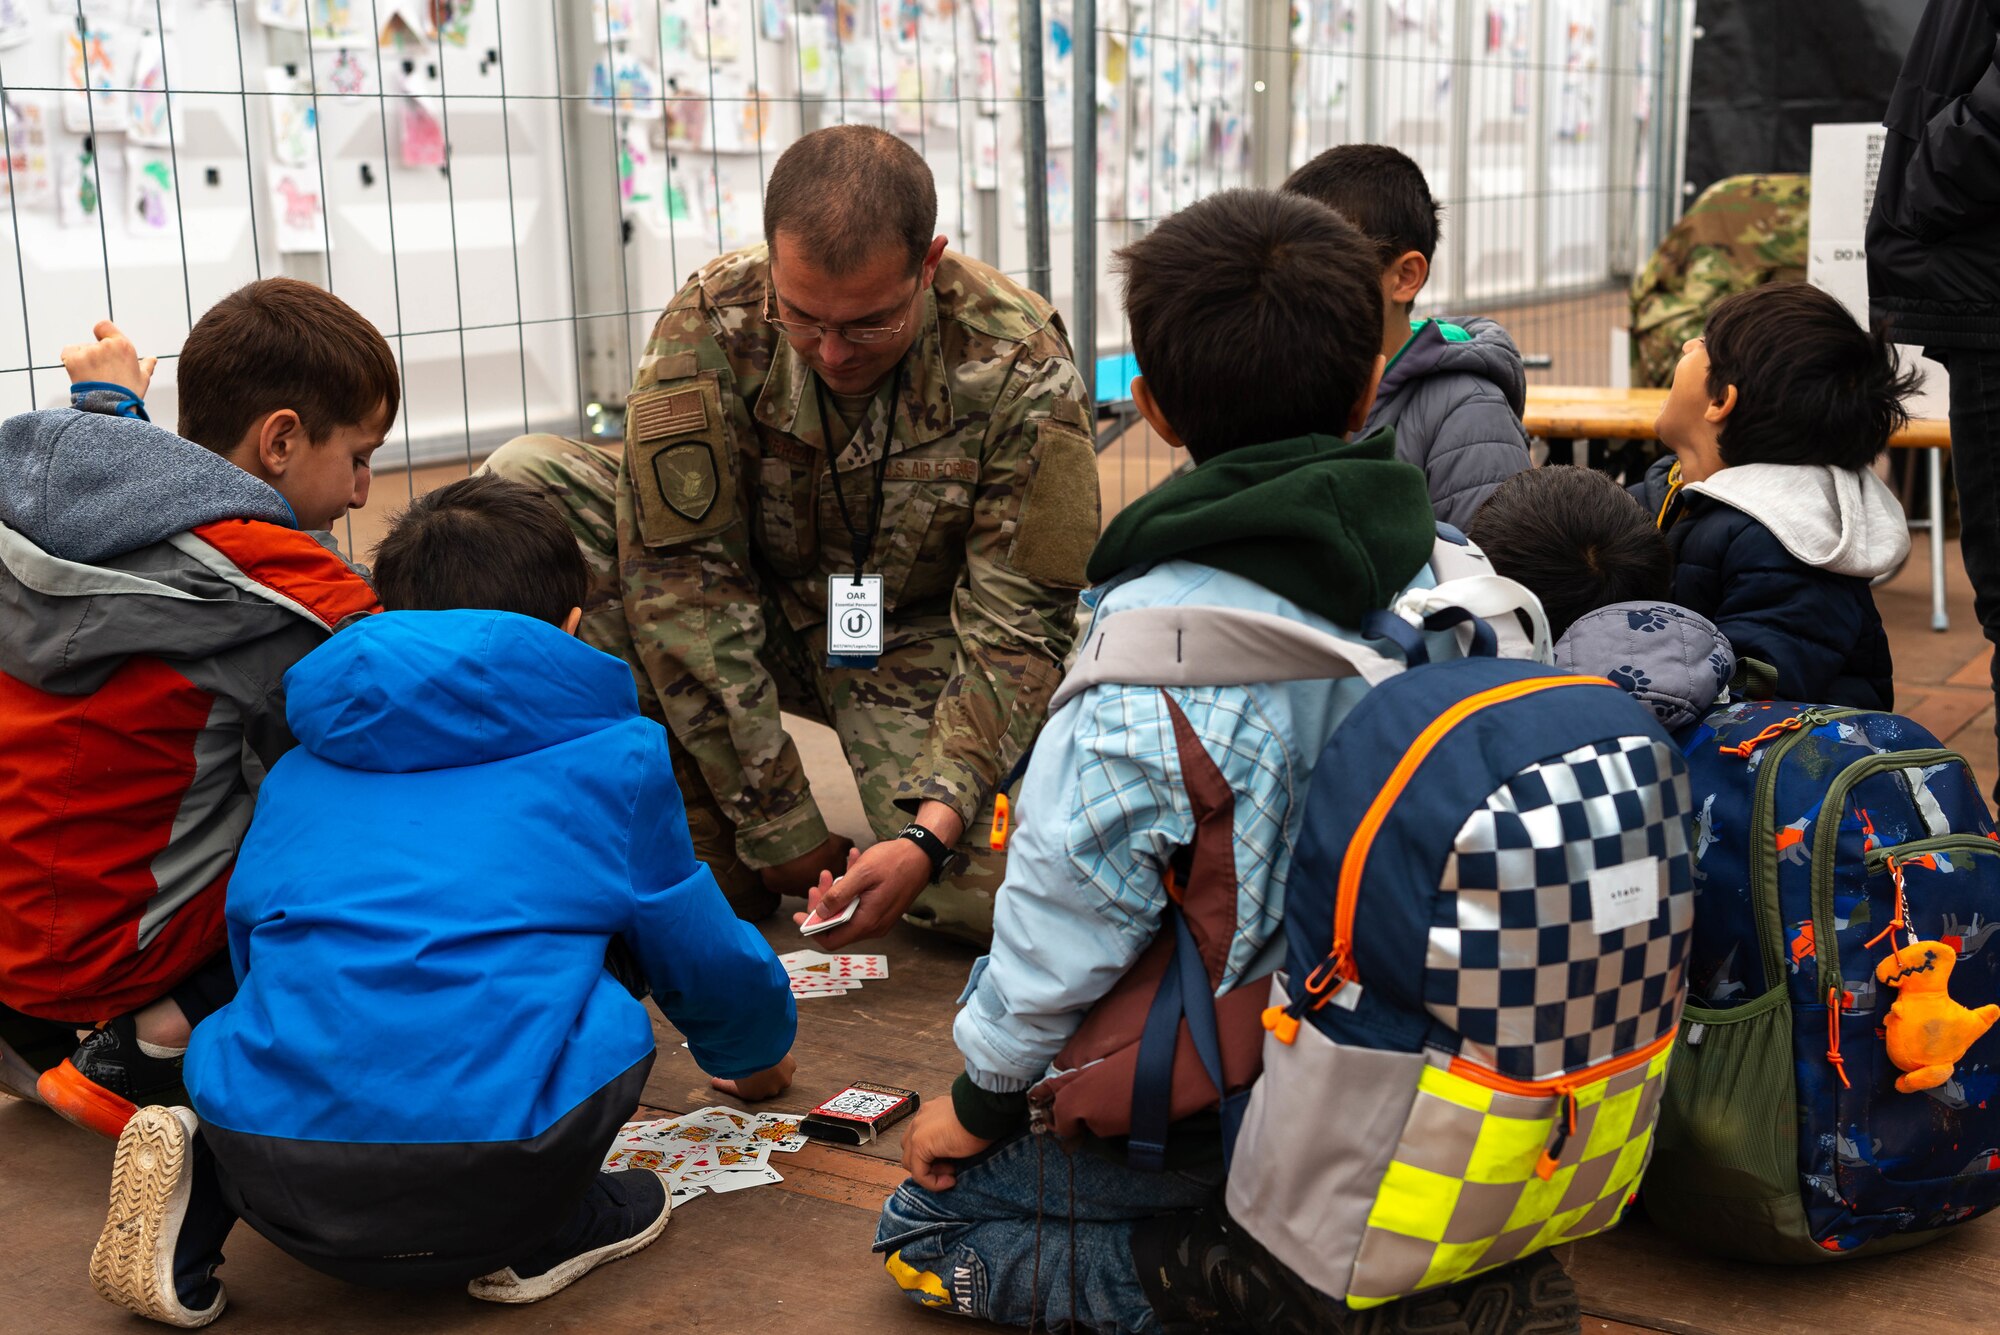 Airman plays cards with evacuees.